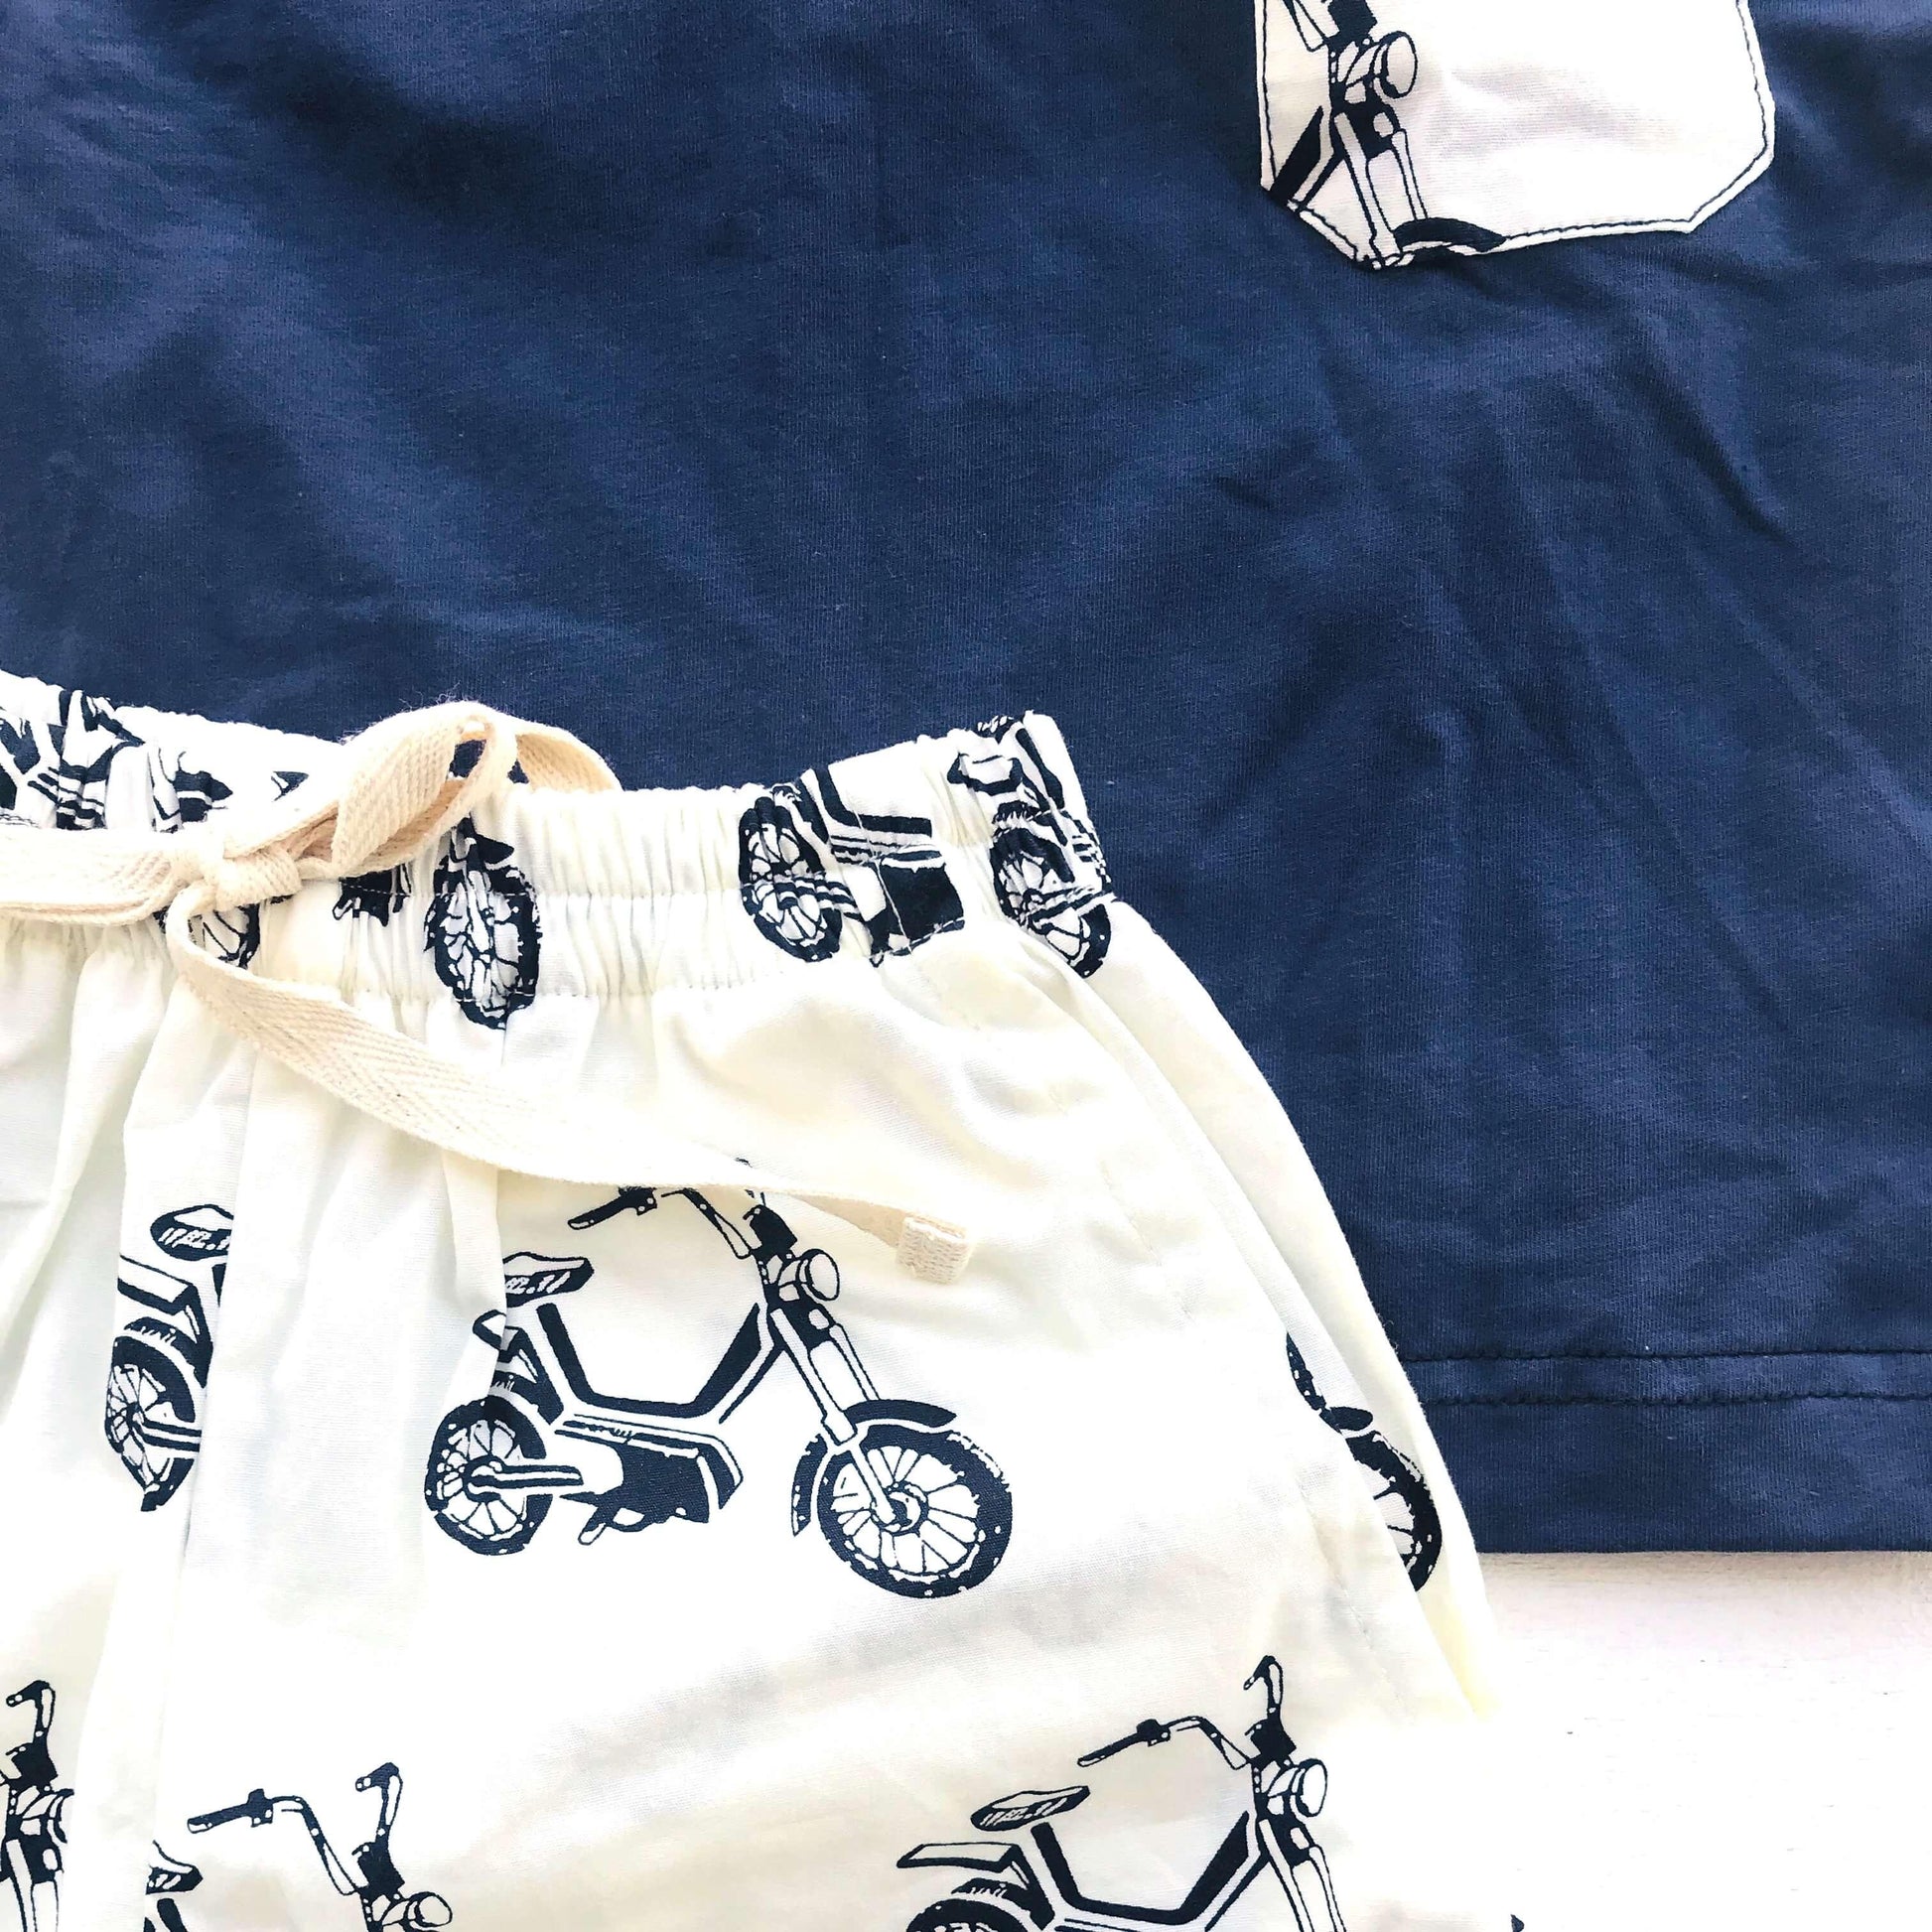 Caper Top & Shorts in Motorcycle White and Navy Stretch - Lil' Tati